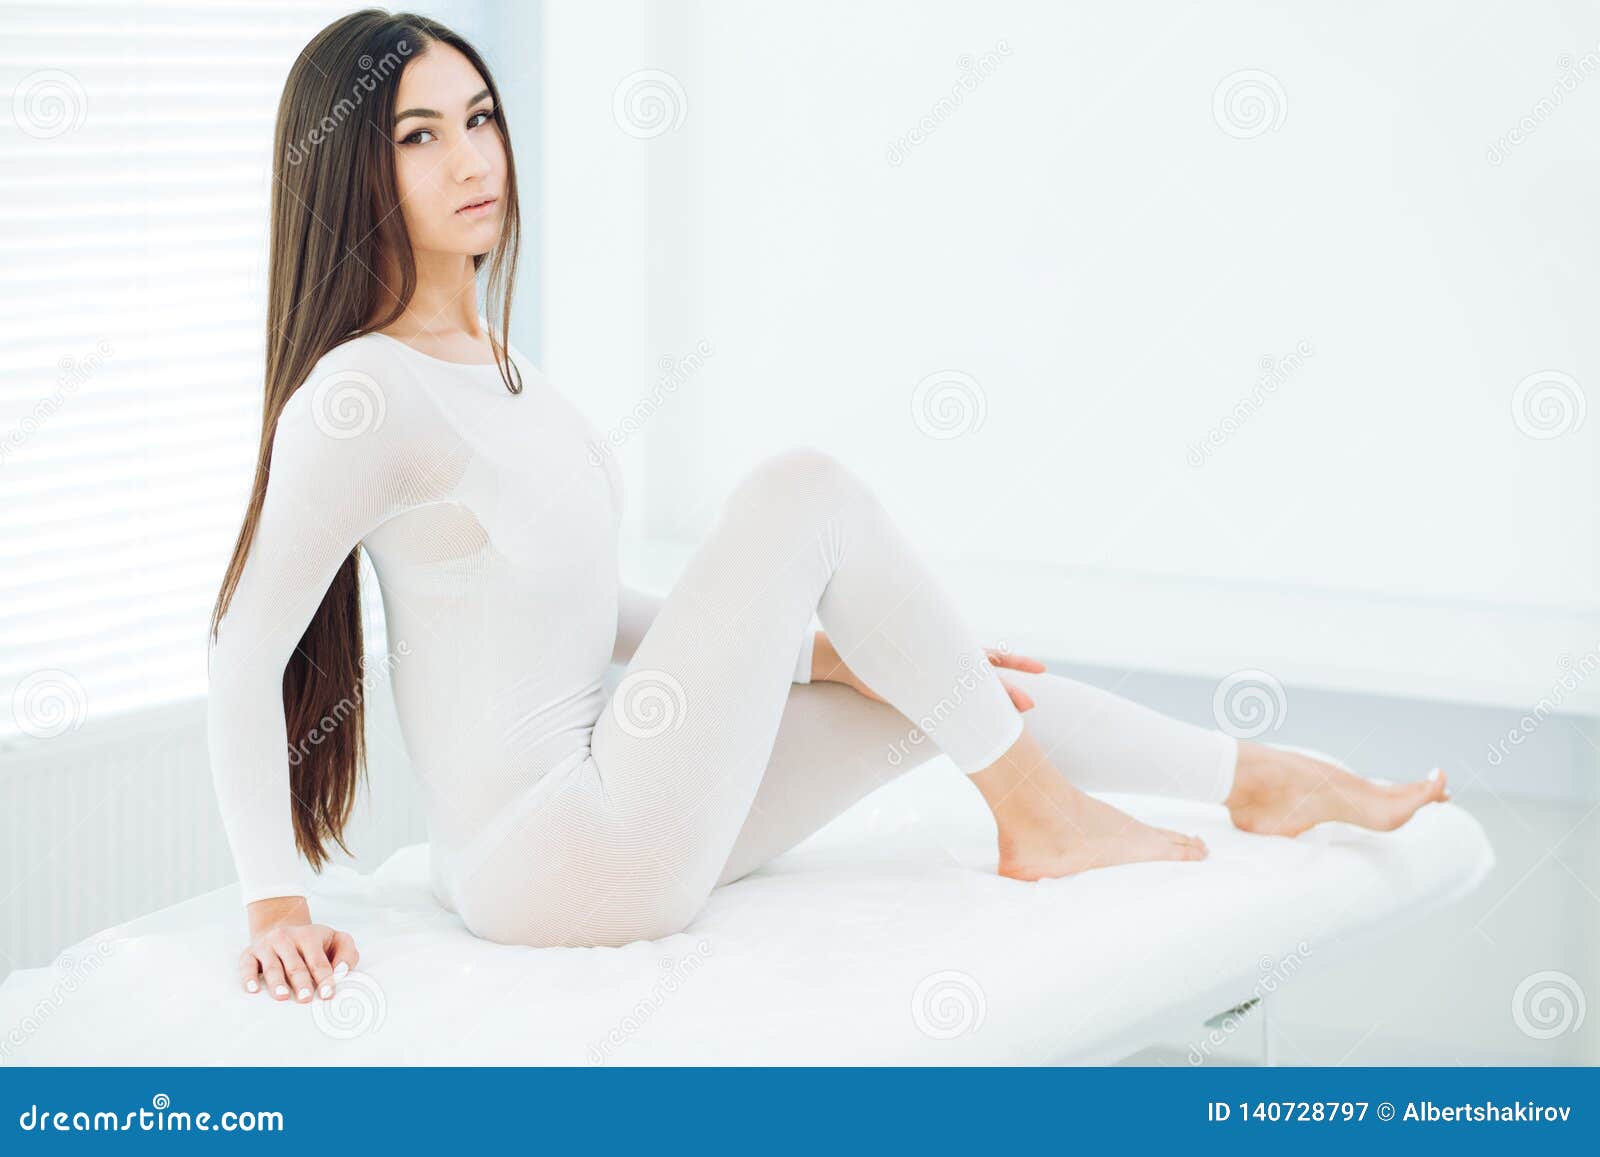 Young Brunette Woman in White Slimming Bodysuit Waiting for LPG Massage  Session Stock Image - Image of beautician, clinic: 140728797